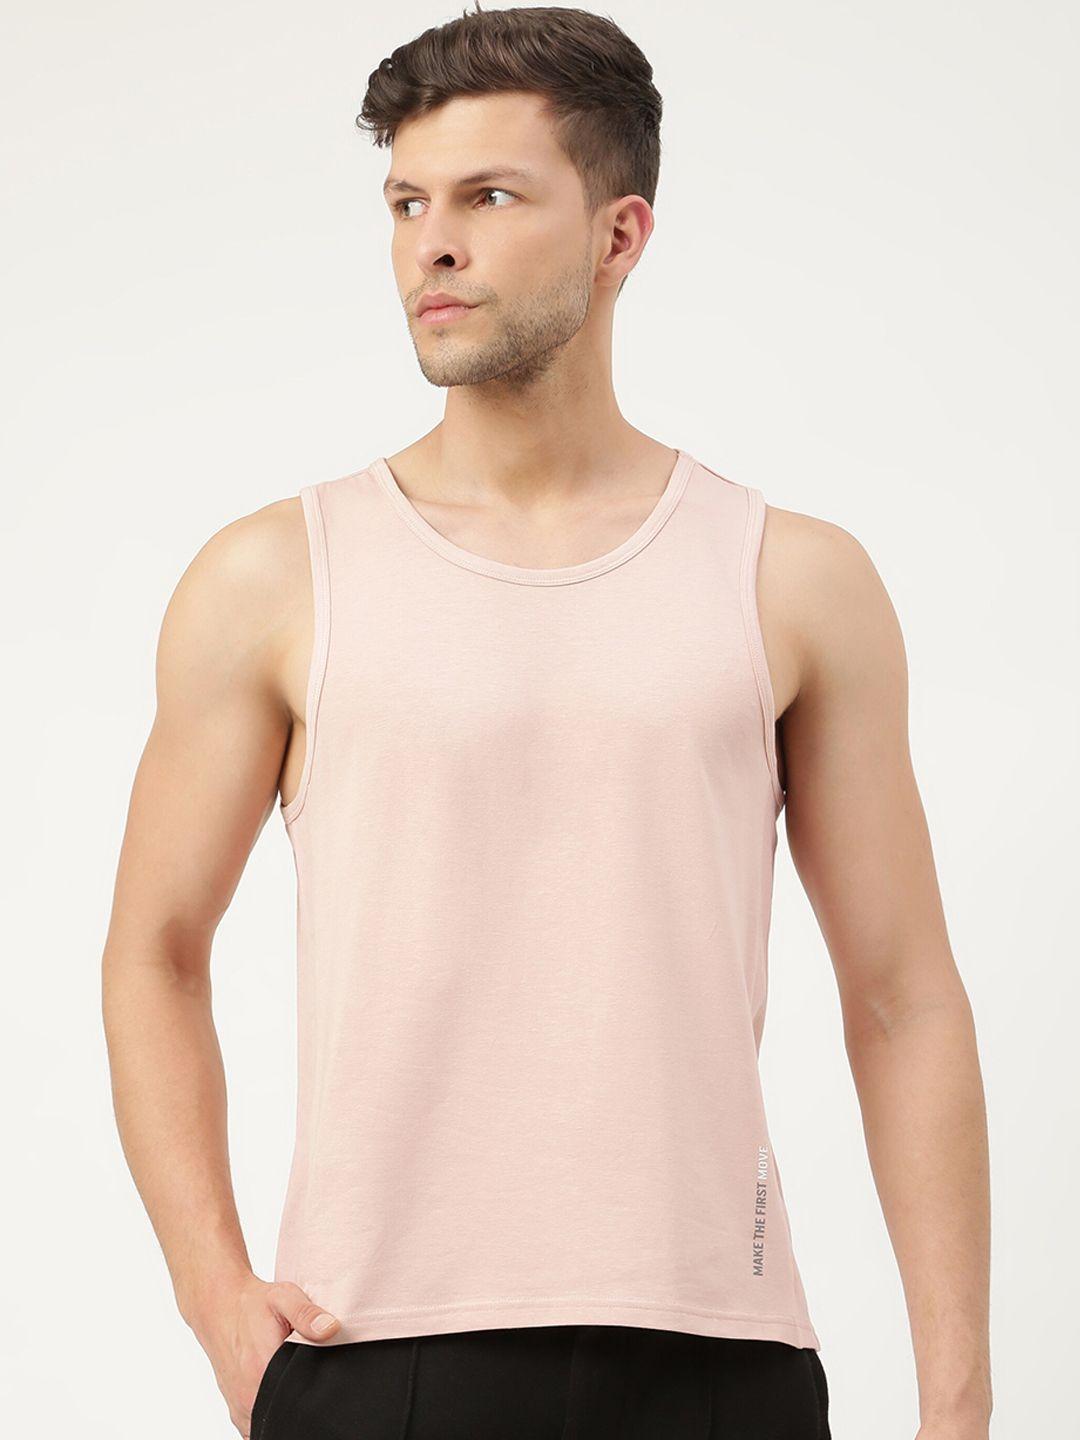 freecultr men peach coloured solid bamboo cotton innerwear gym vests